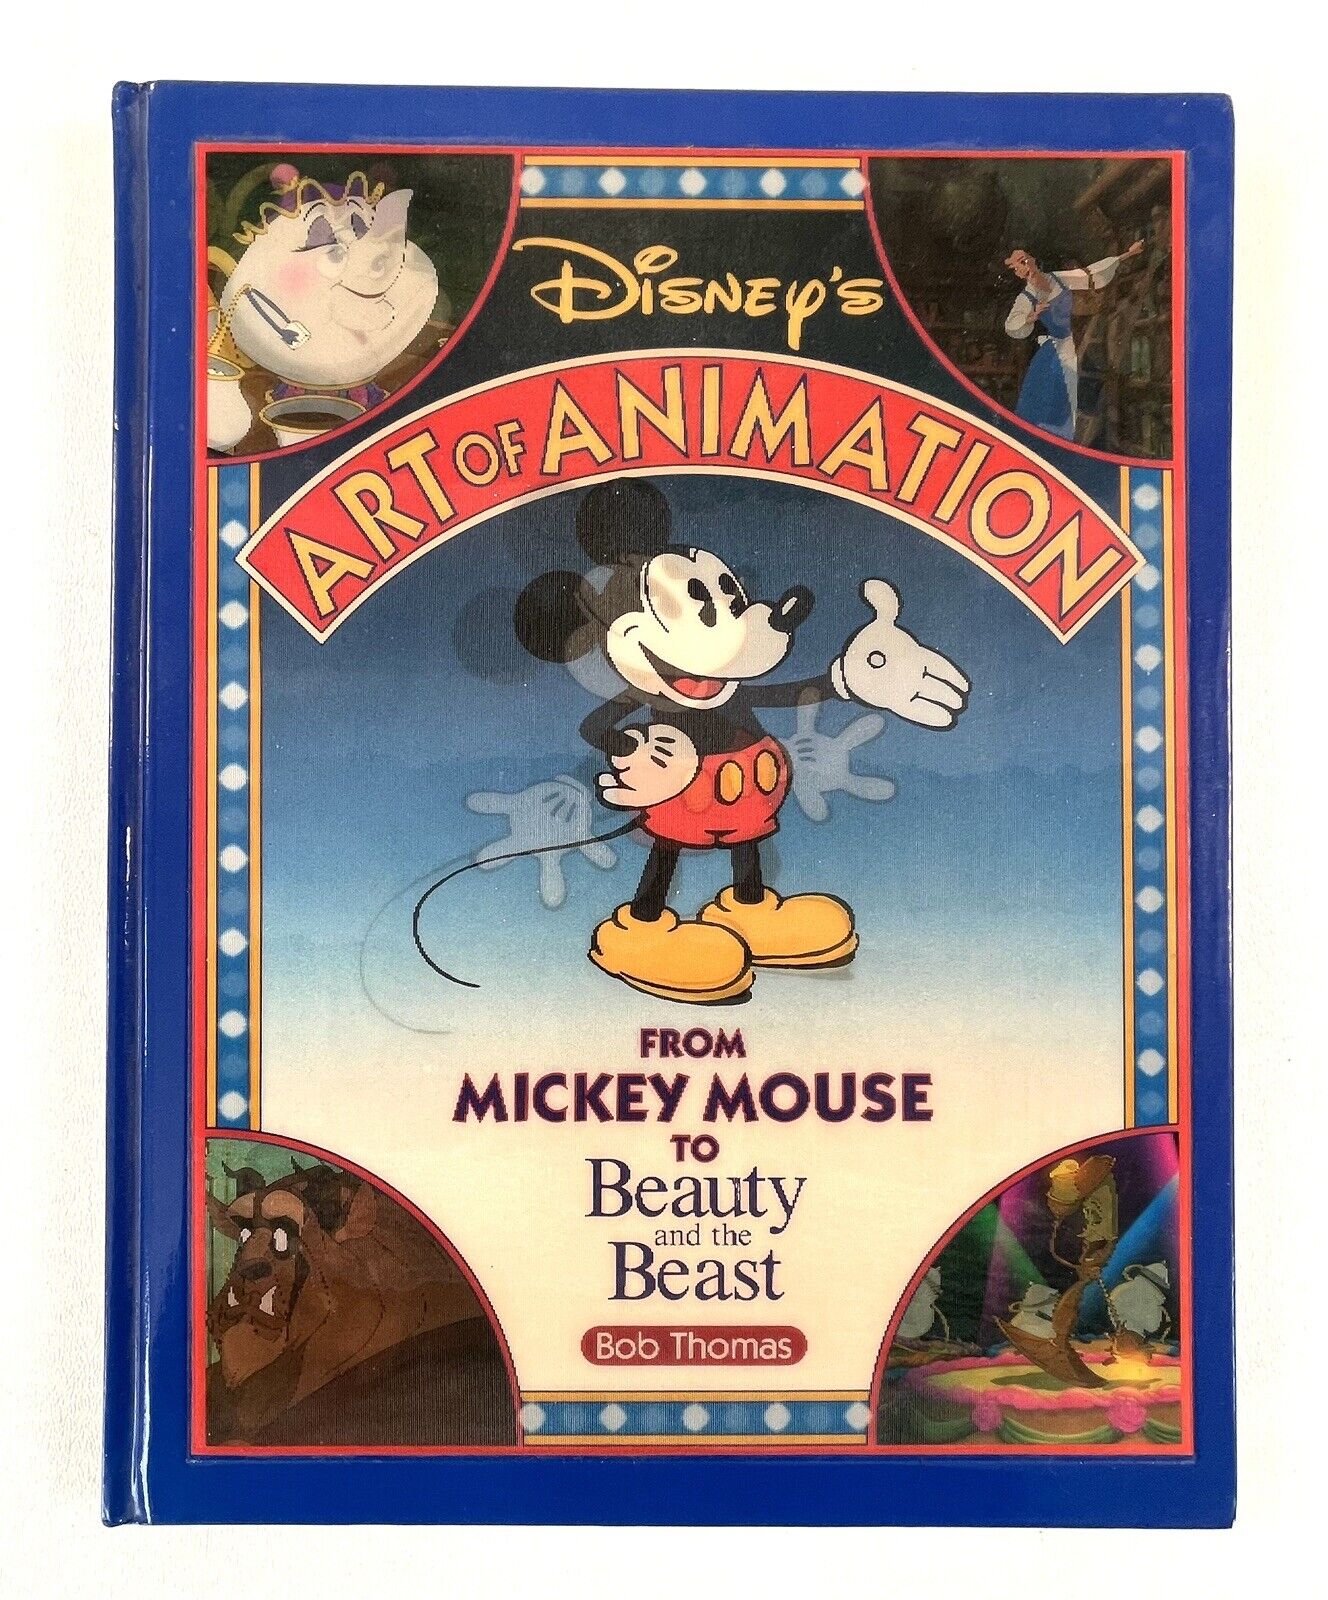 Disney's Art of Animation From Mickey Mouse to Beauty and the Beast #1 hardcover